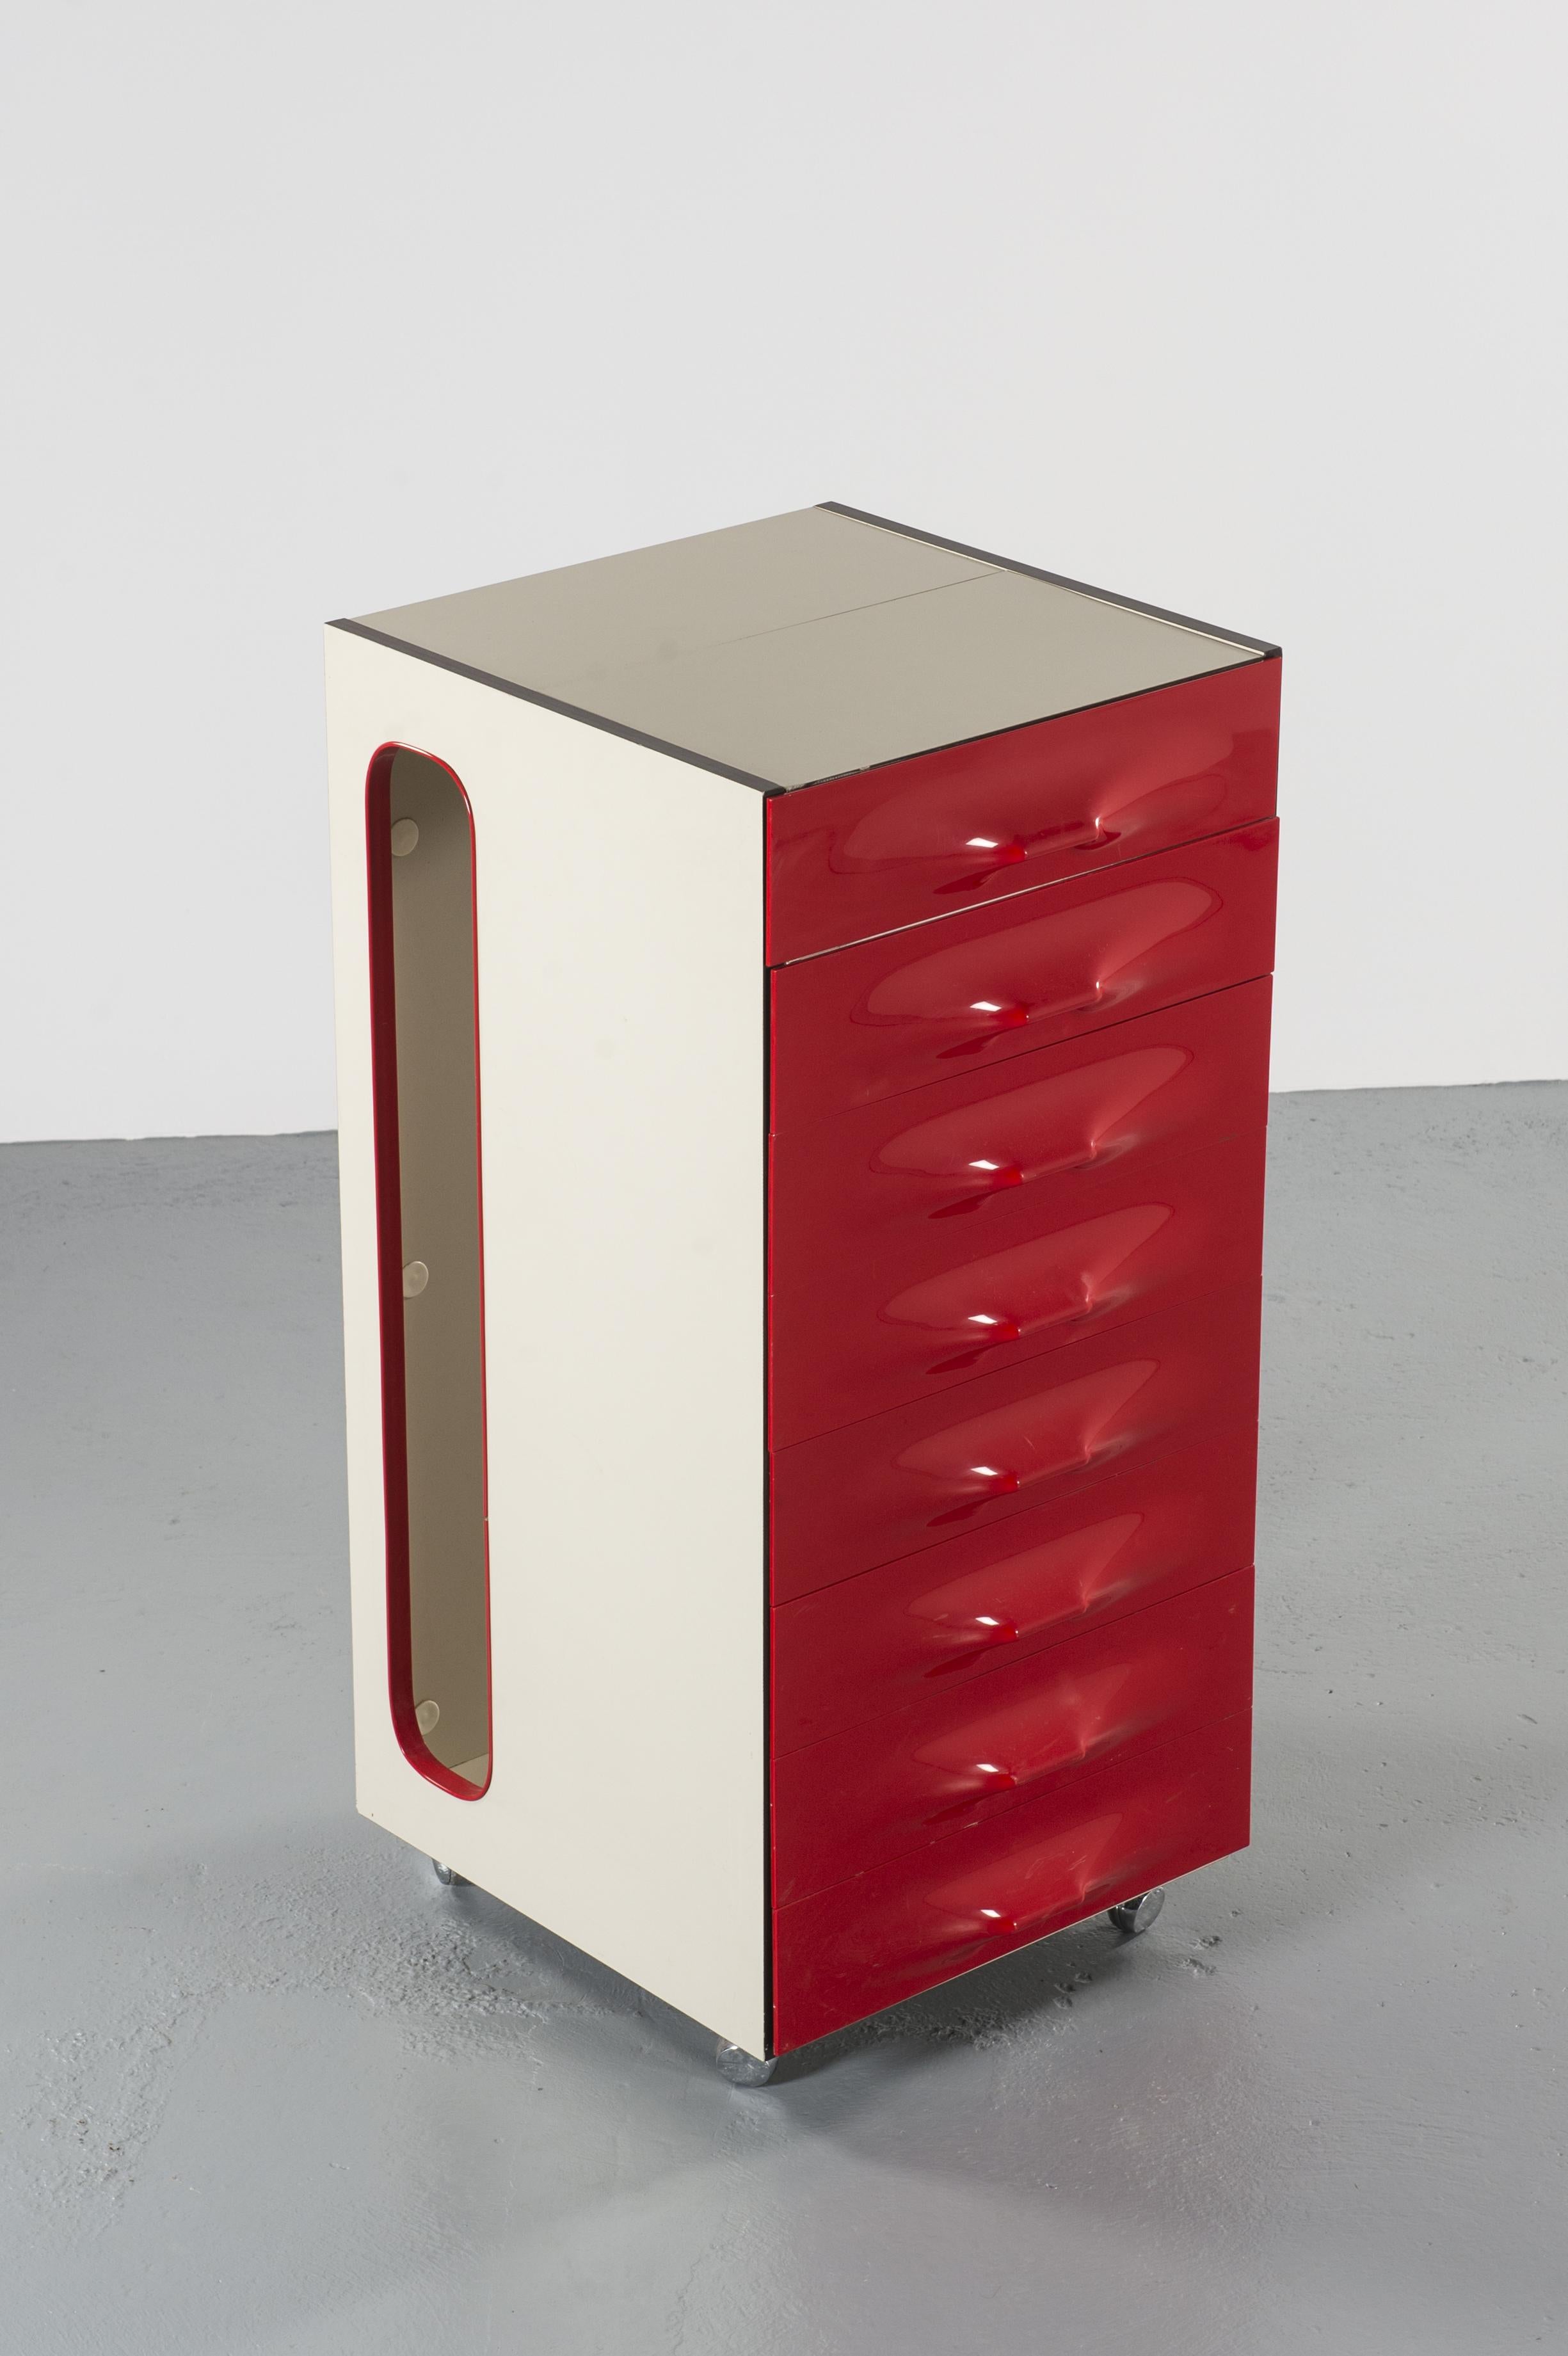 Raymond Loewy Df-2000 valet, circa 1960, France 

The model DF-2000 valet is a compact dressing cabinet designed by Raymond Loewy for Doubinsky Frères, France, 1960s. It is a flip-flap top dressing with mirror. The others are storage drawers